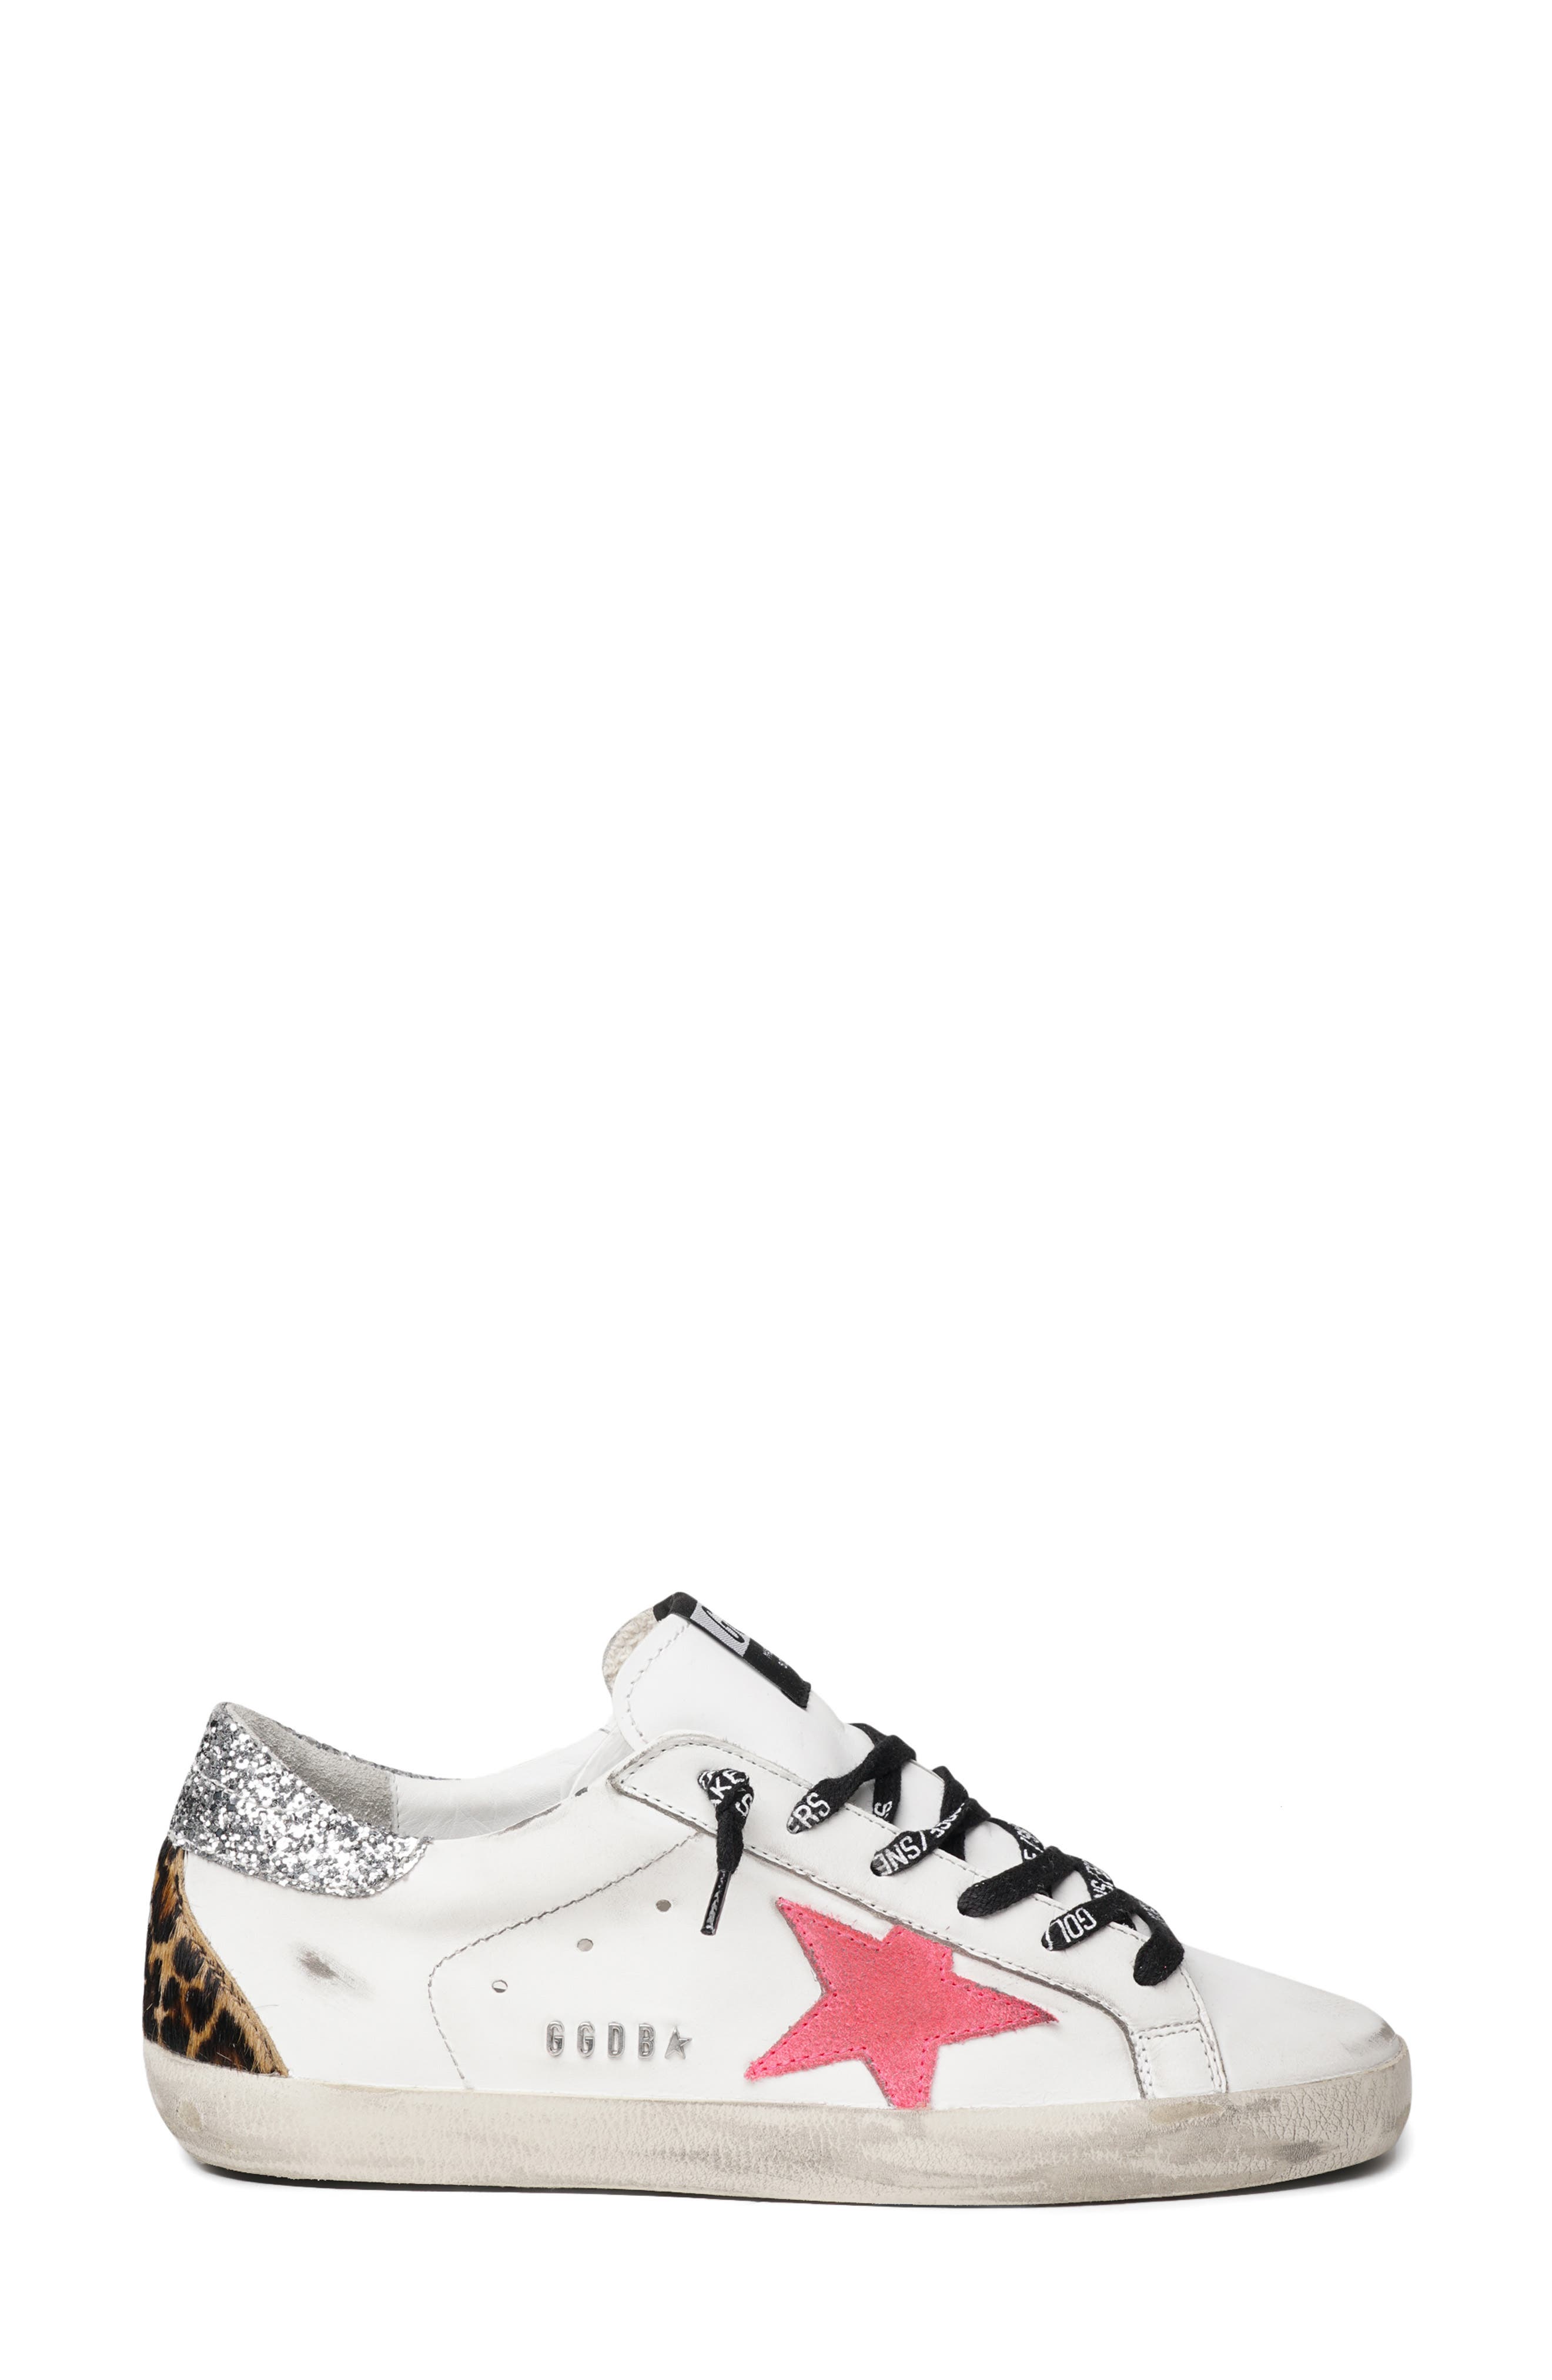 golden goose superstar camouflage private edition